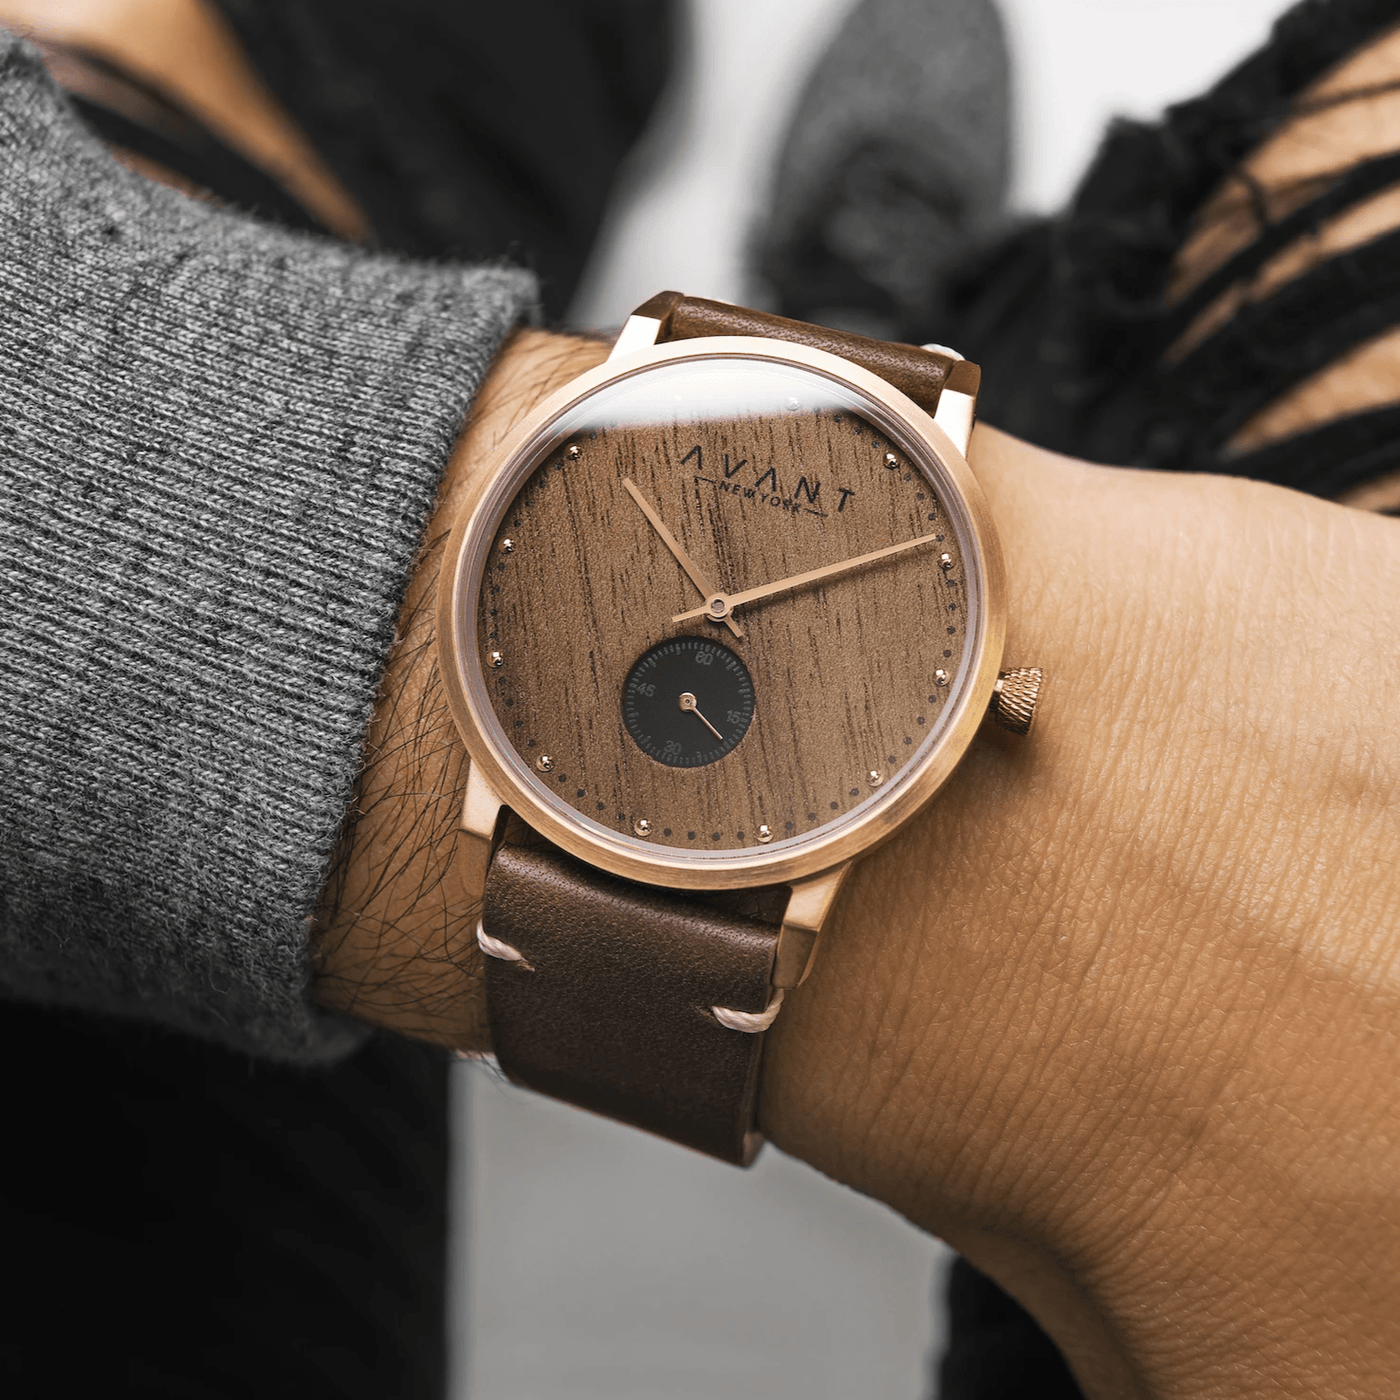 NEW YORK - ROSE GOLD (38MM) by AVANTWOOD